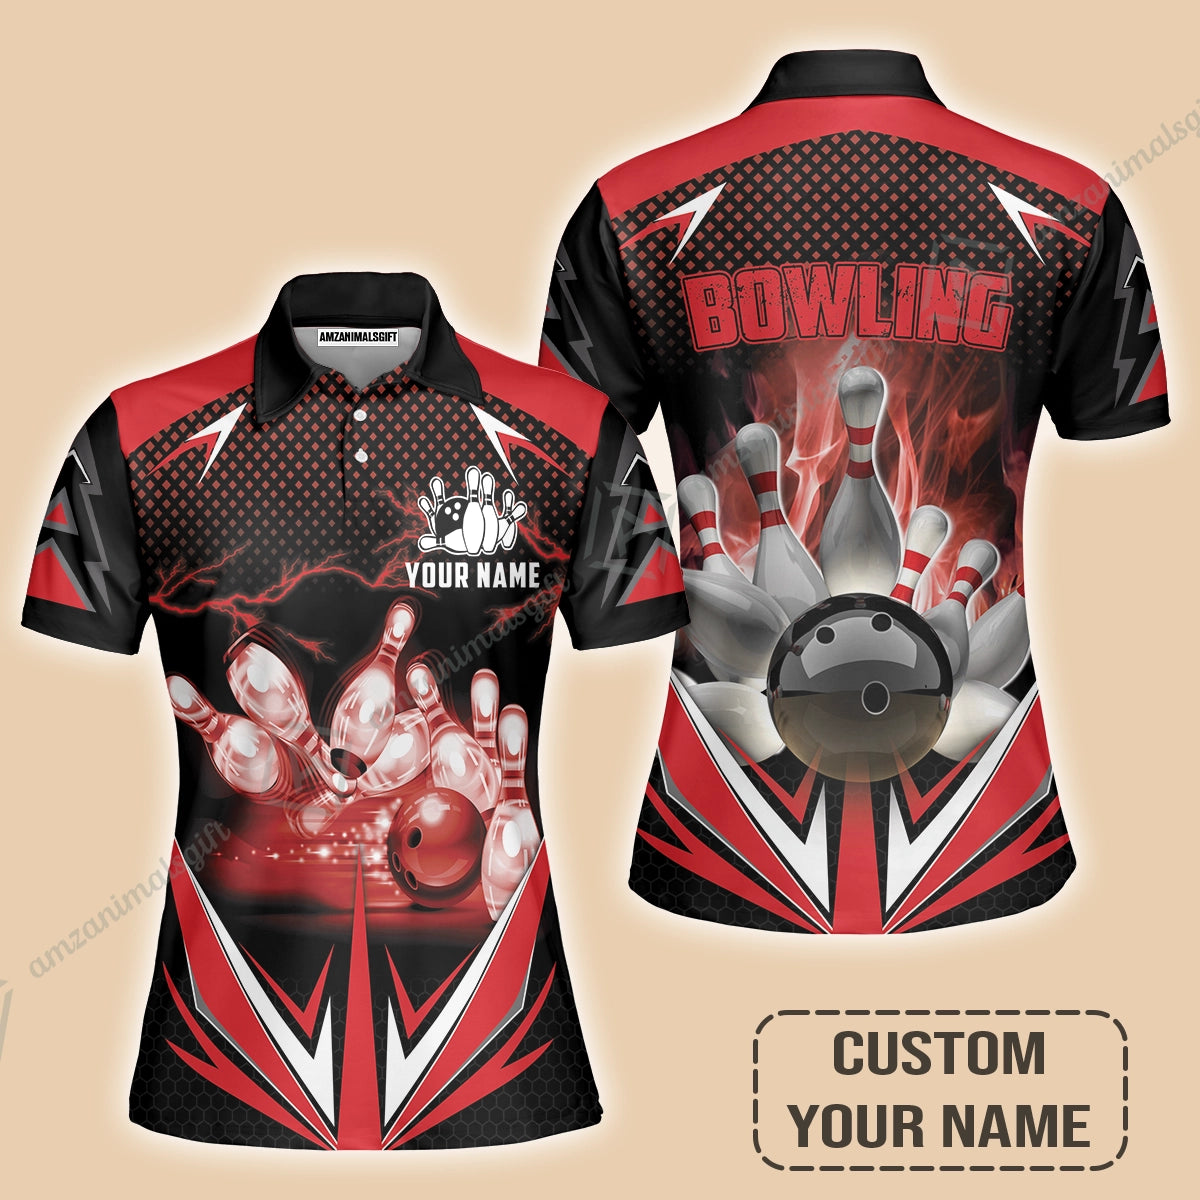 Customized Bowling Red Fire Women Polo Shirt For Bowling Players, Bowling Team Uniform Shirts, Gift For Men, Bowling Lovers, Bowlers